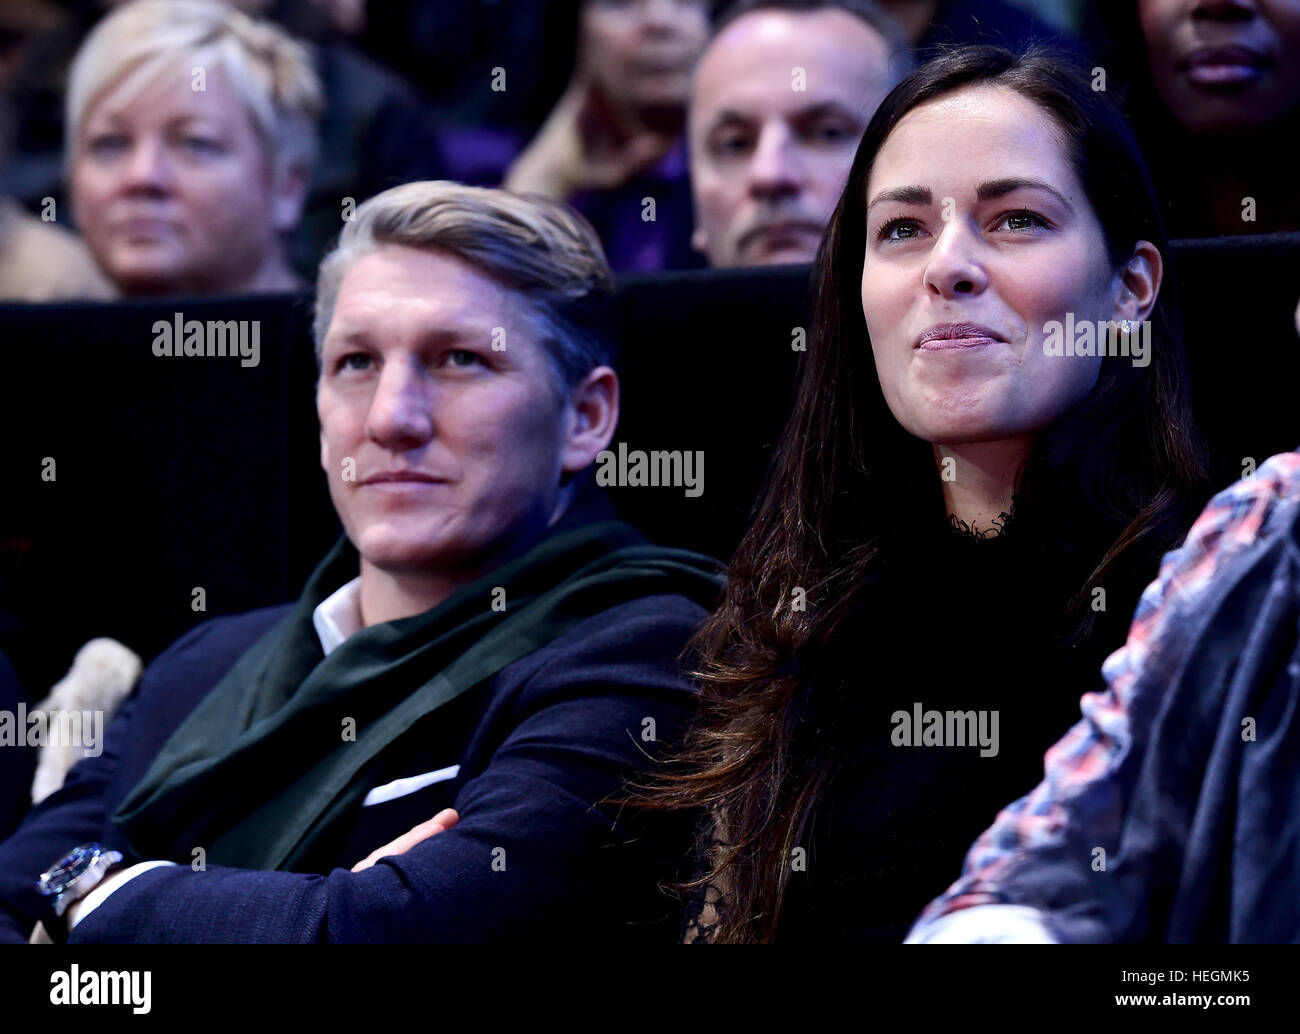 Bastian Schweinsteiger and Ana Ivanovic watching the Singles Final of the Barclays ATP World Tour Finals, between Novak Djokovic of Serbia and Andy Murray of Great Britain, at the O2 Arena in London.  Featuring: Bastian Schweinsteiger, Ana Ivanovic Where: Stock Photo